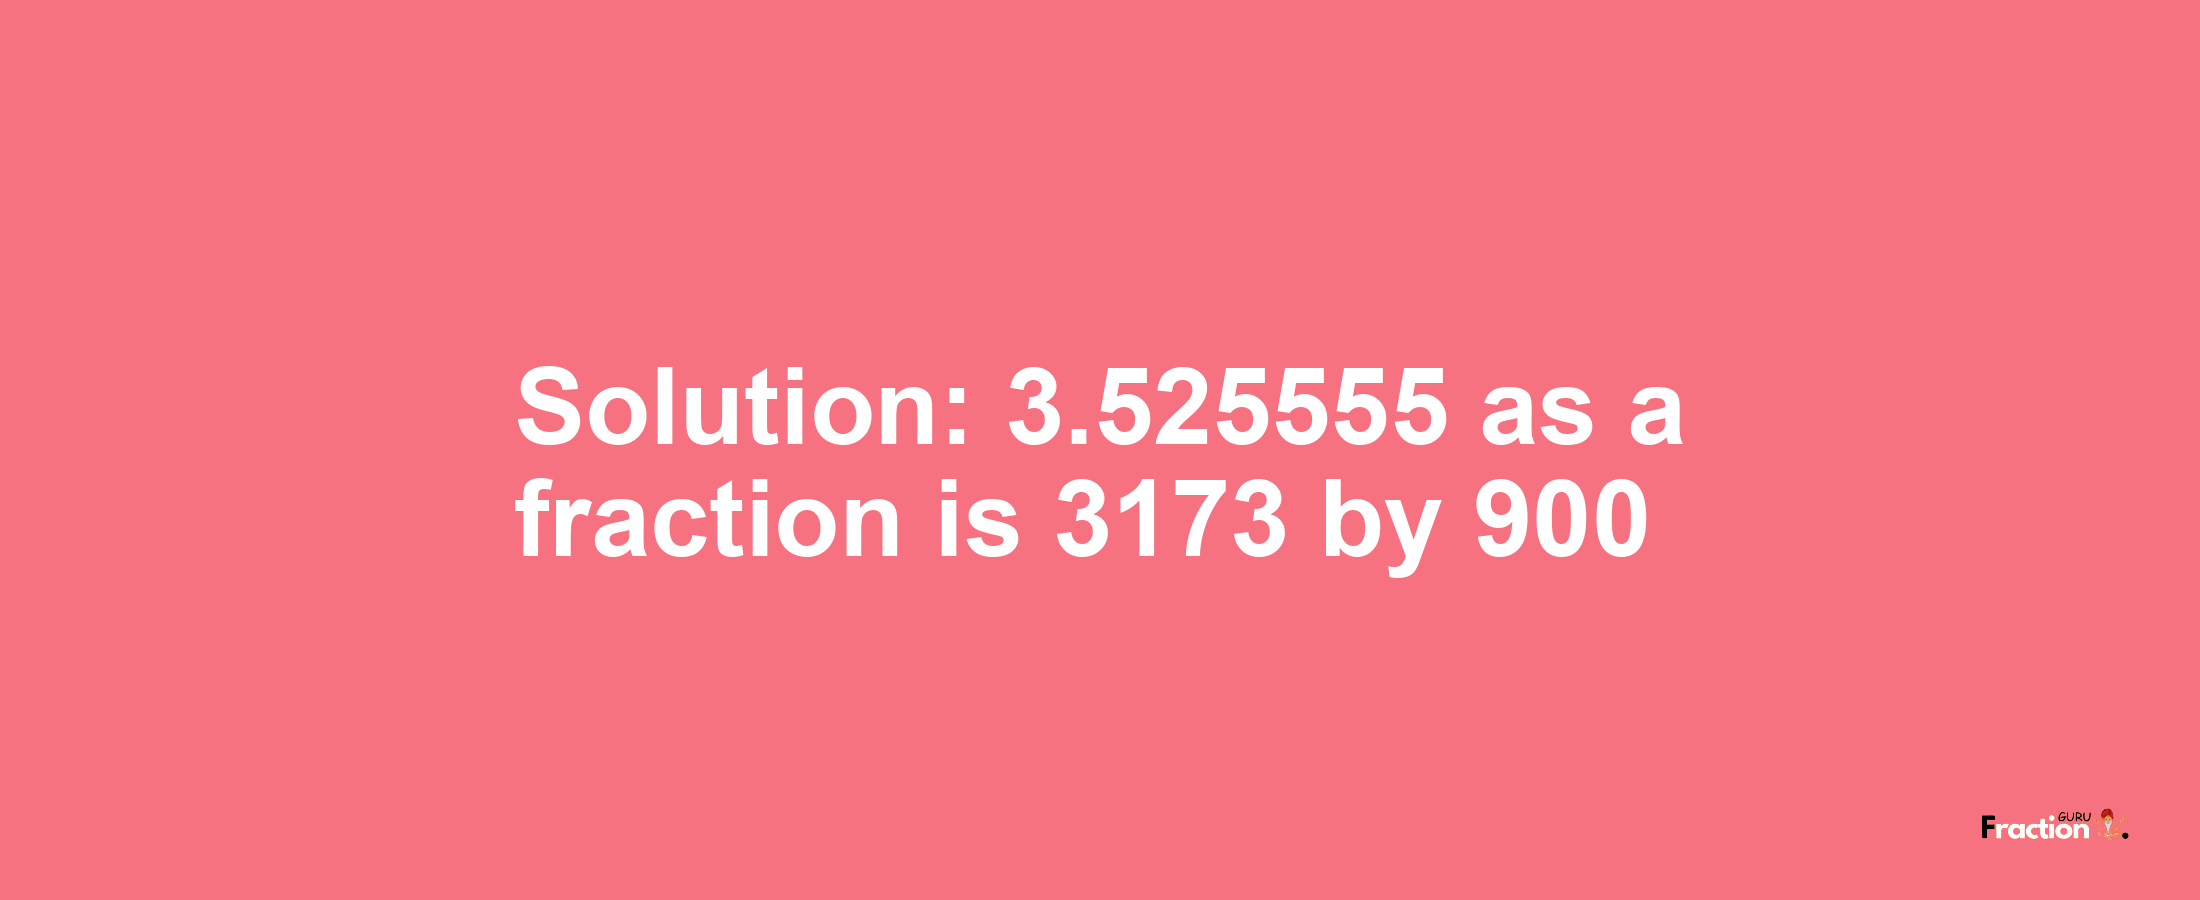 Solution:3.525555 as a fraction is 3173/900